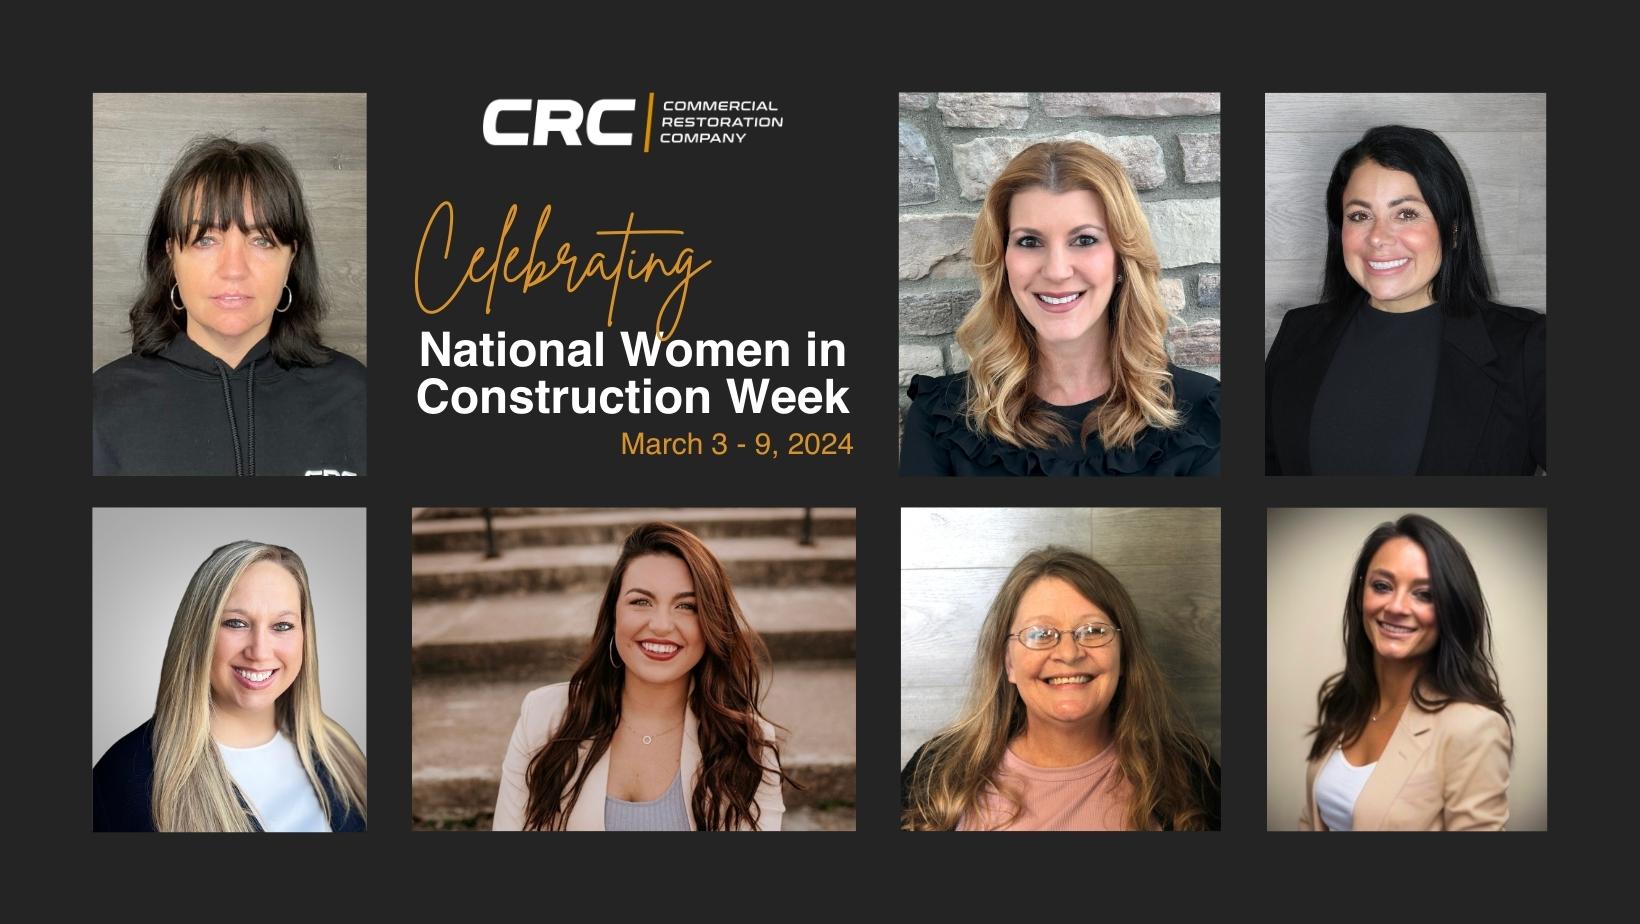 Cultivating Champions: CRC Celebrates National Women in Construction Week